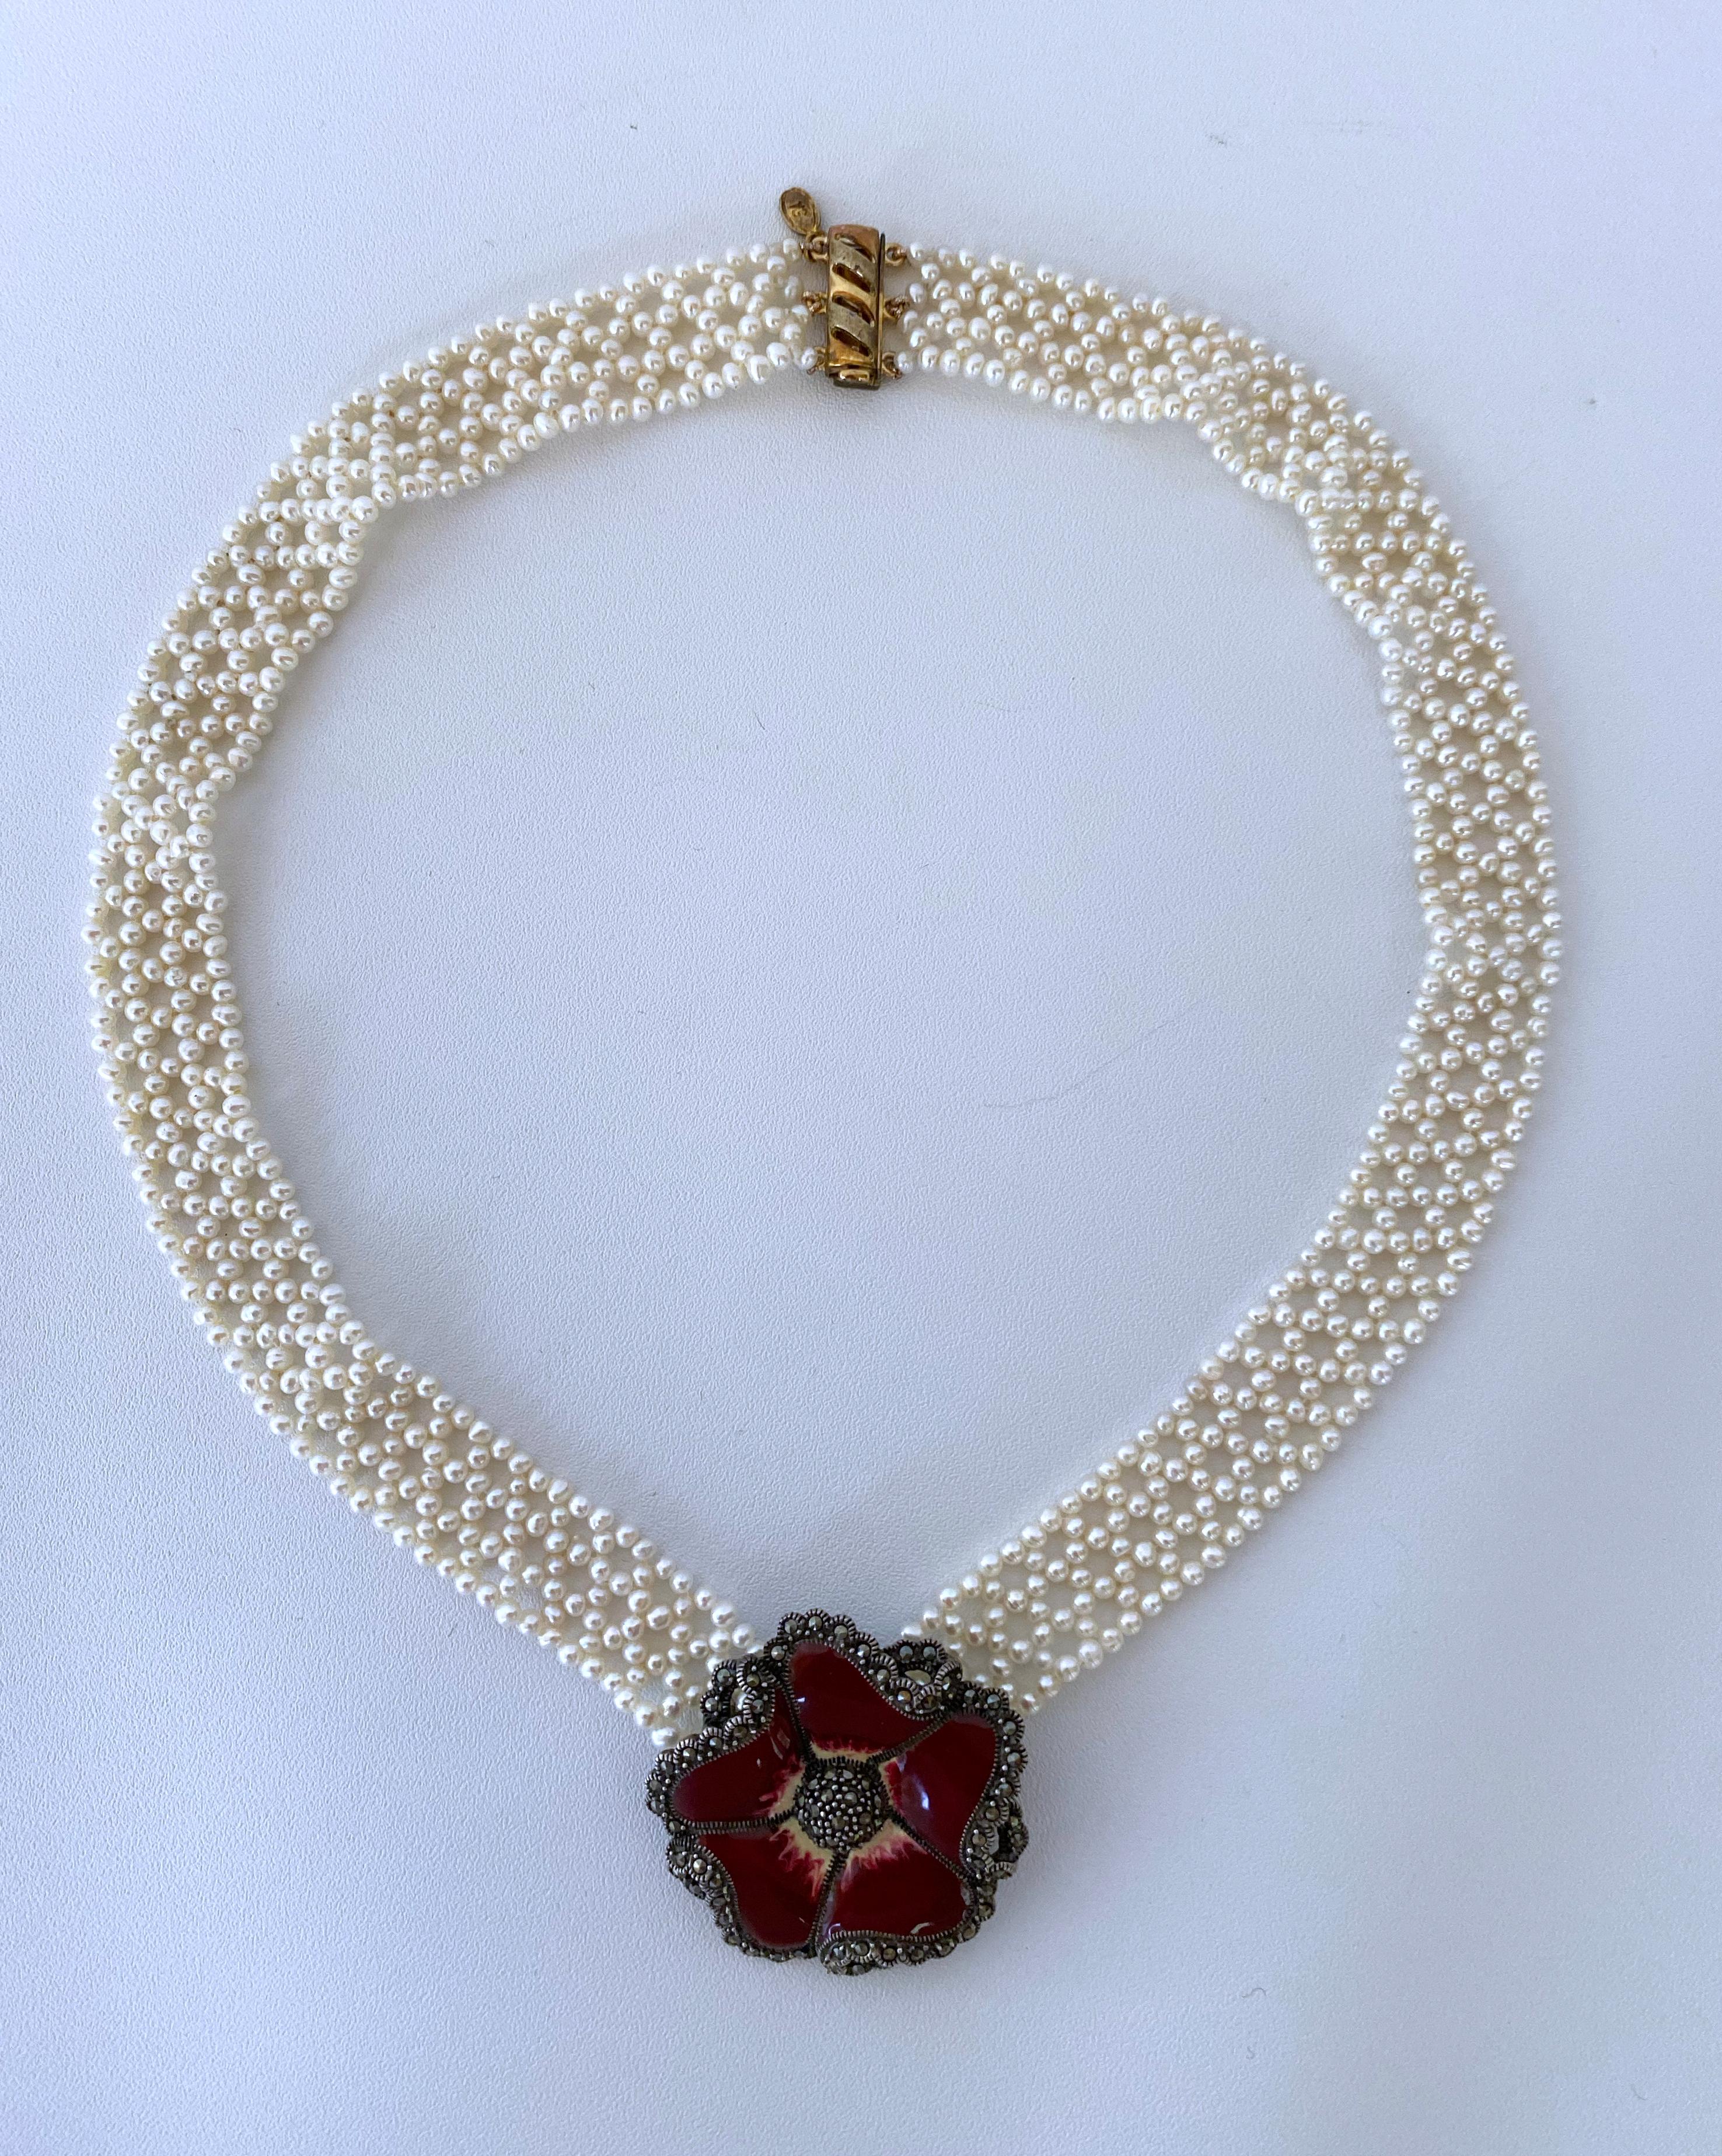 Marina J Woven 'V' Shaped Pearl Necklace with Vintage Brooch 7